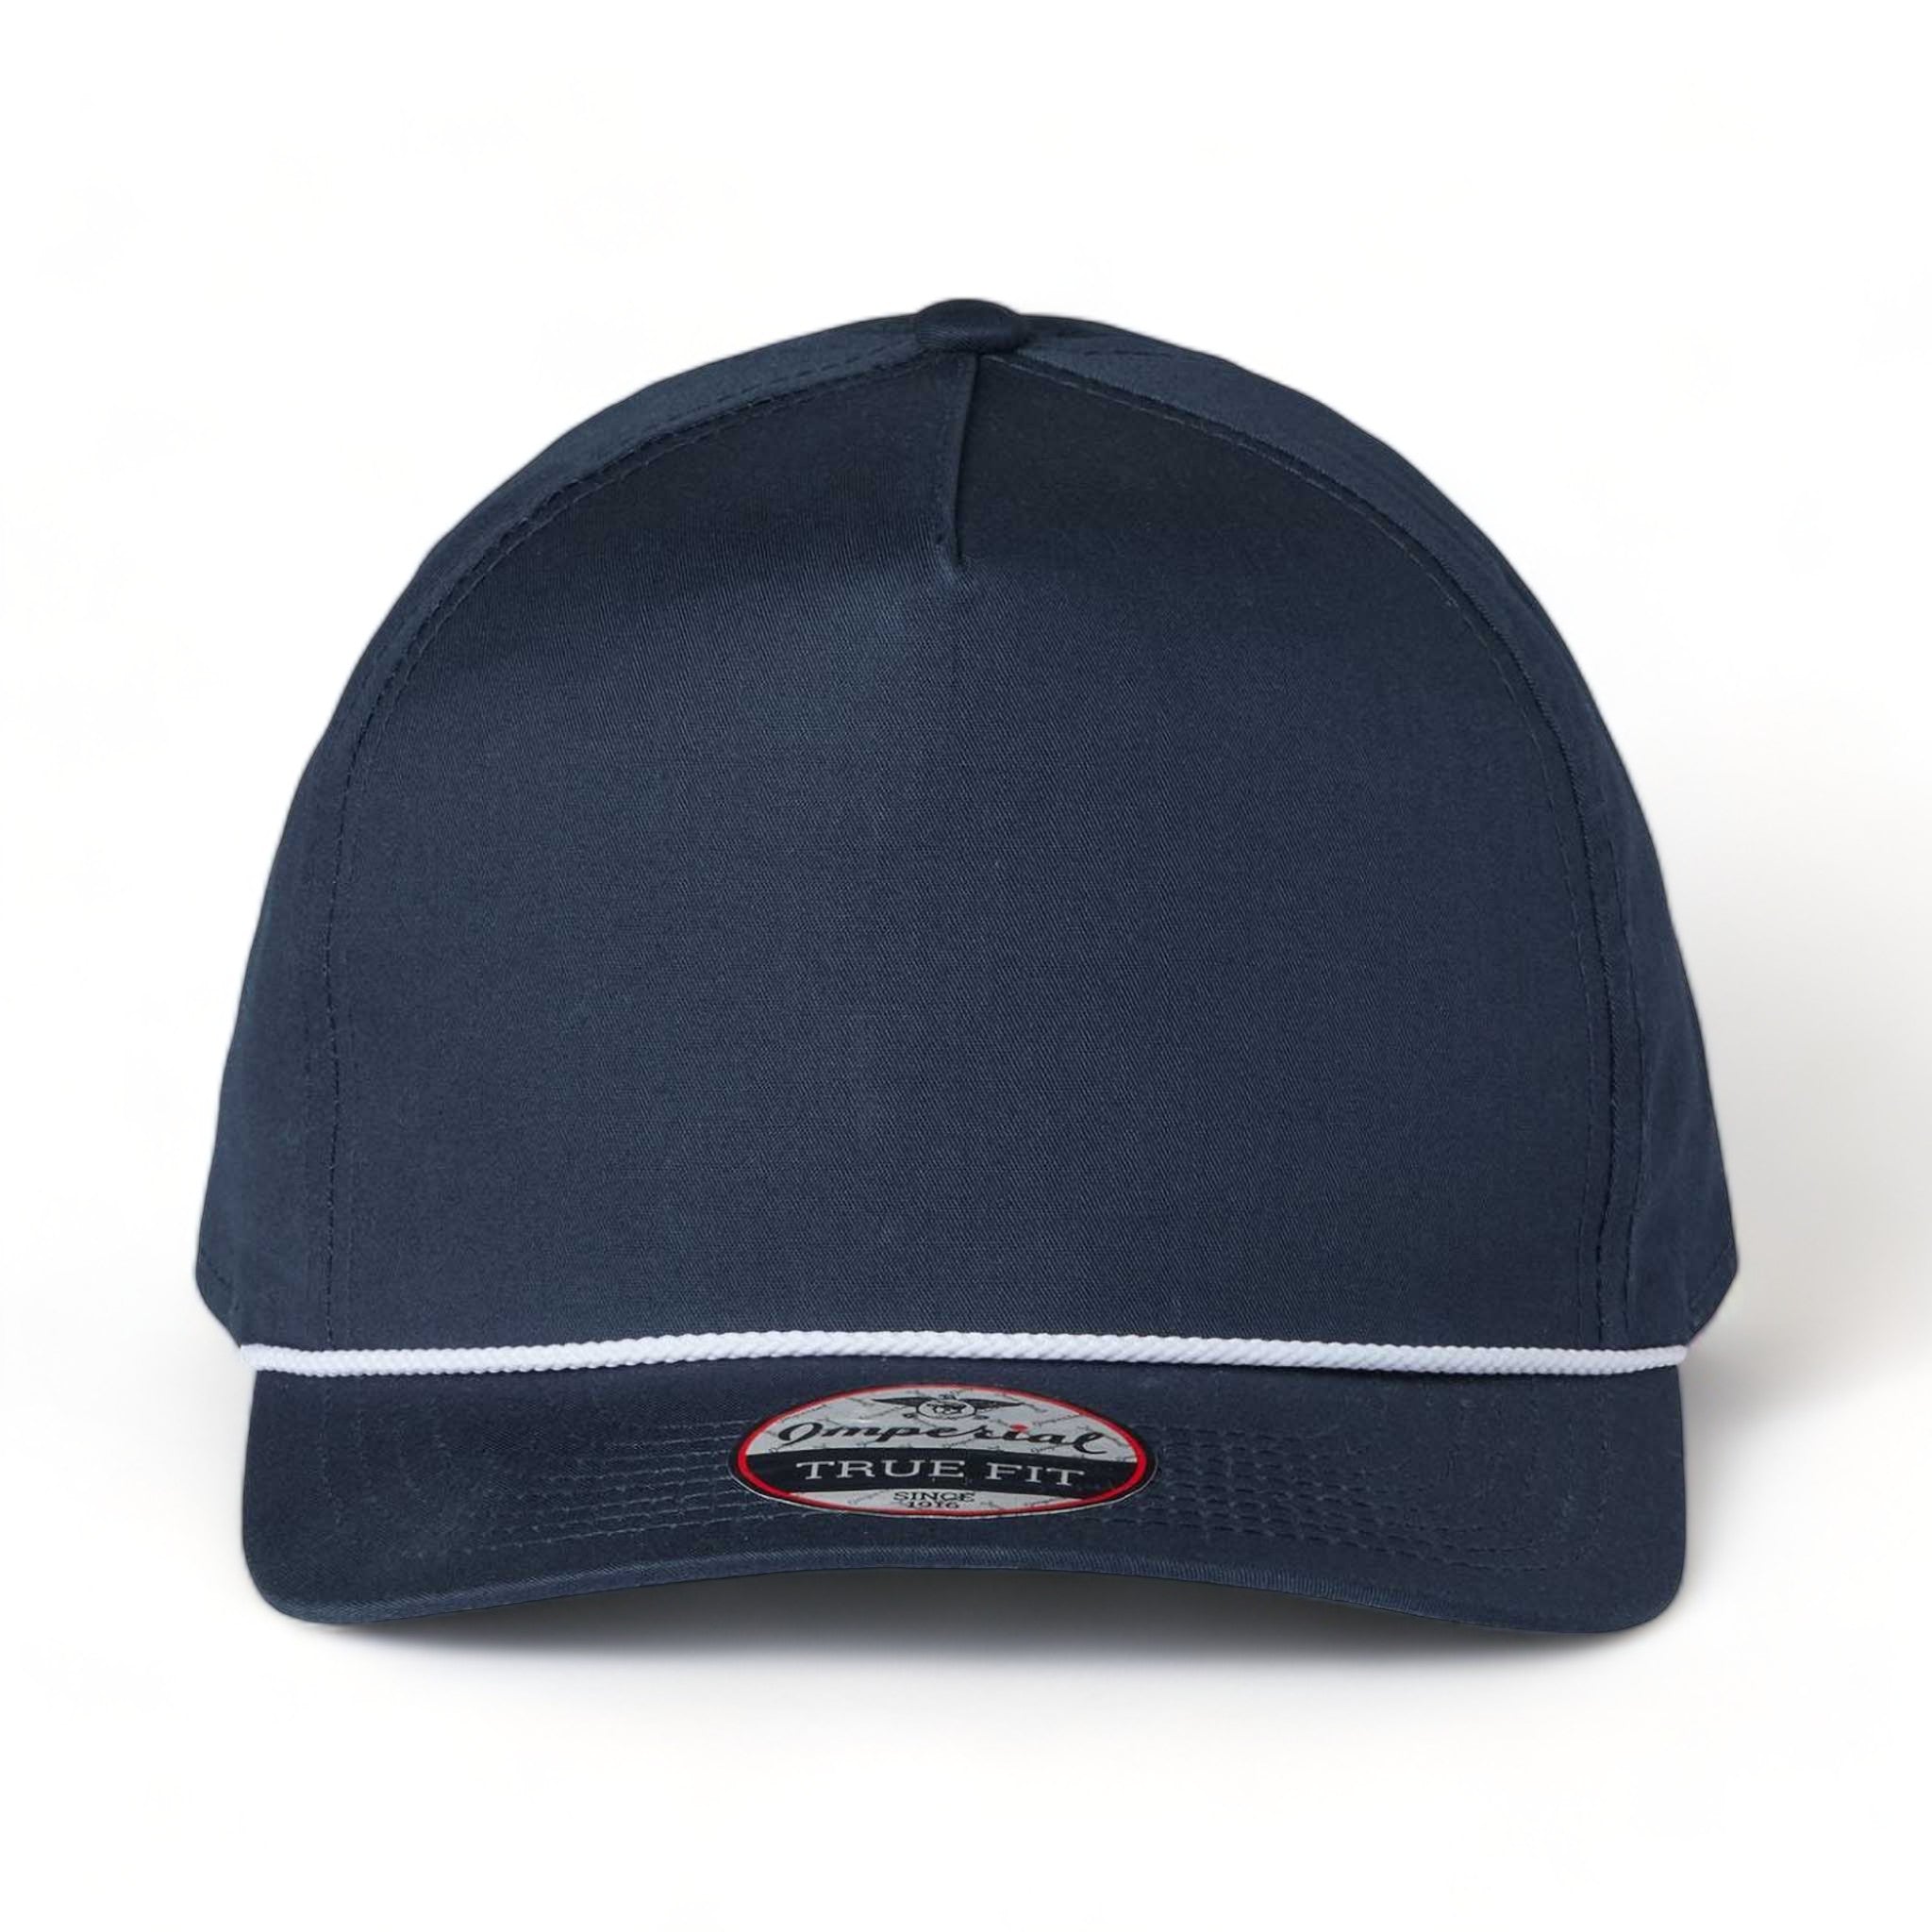 Front view of Imperial 5056 custom hat in navy and white